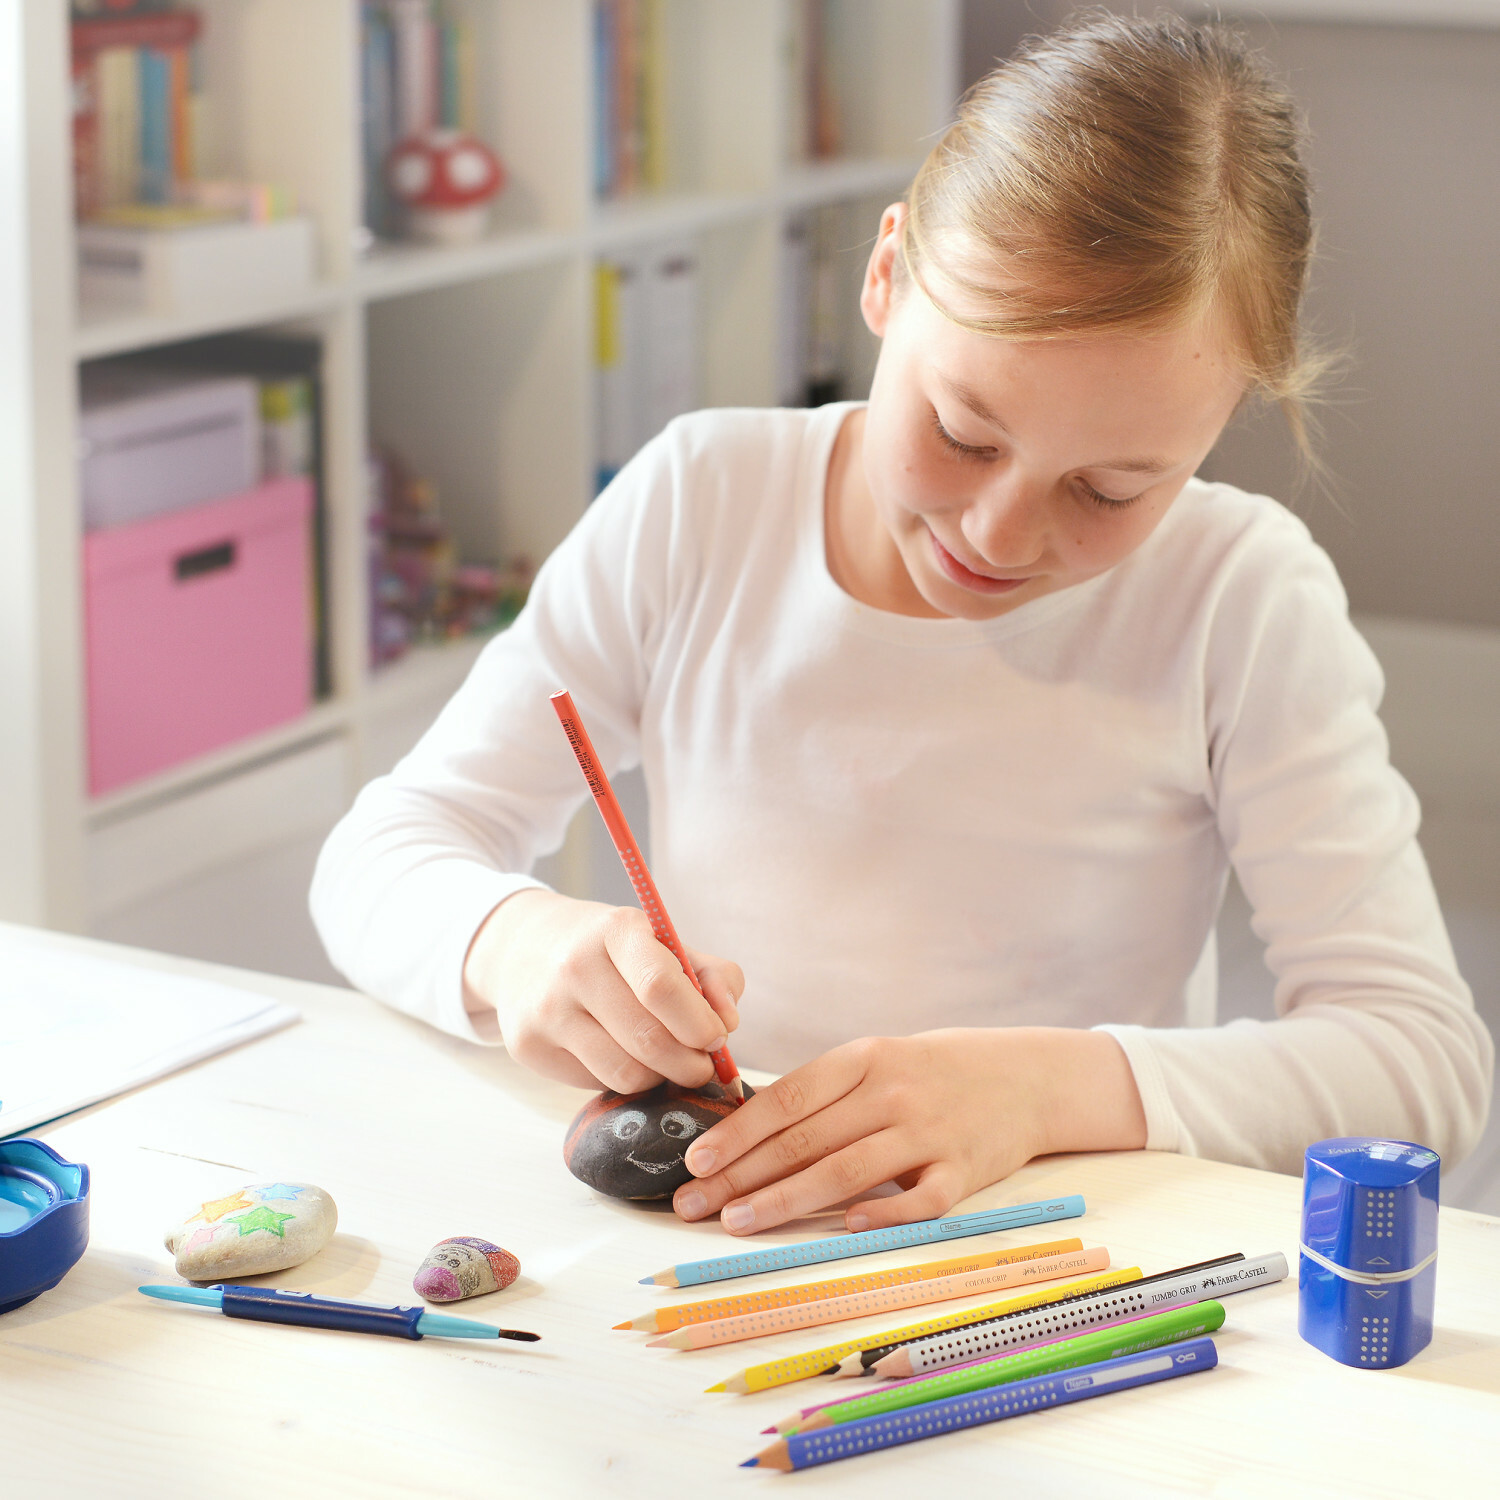 GRIP Trio Pencil sharpener – Imaginuity Play with a Purpose